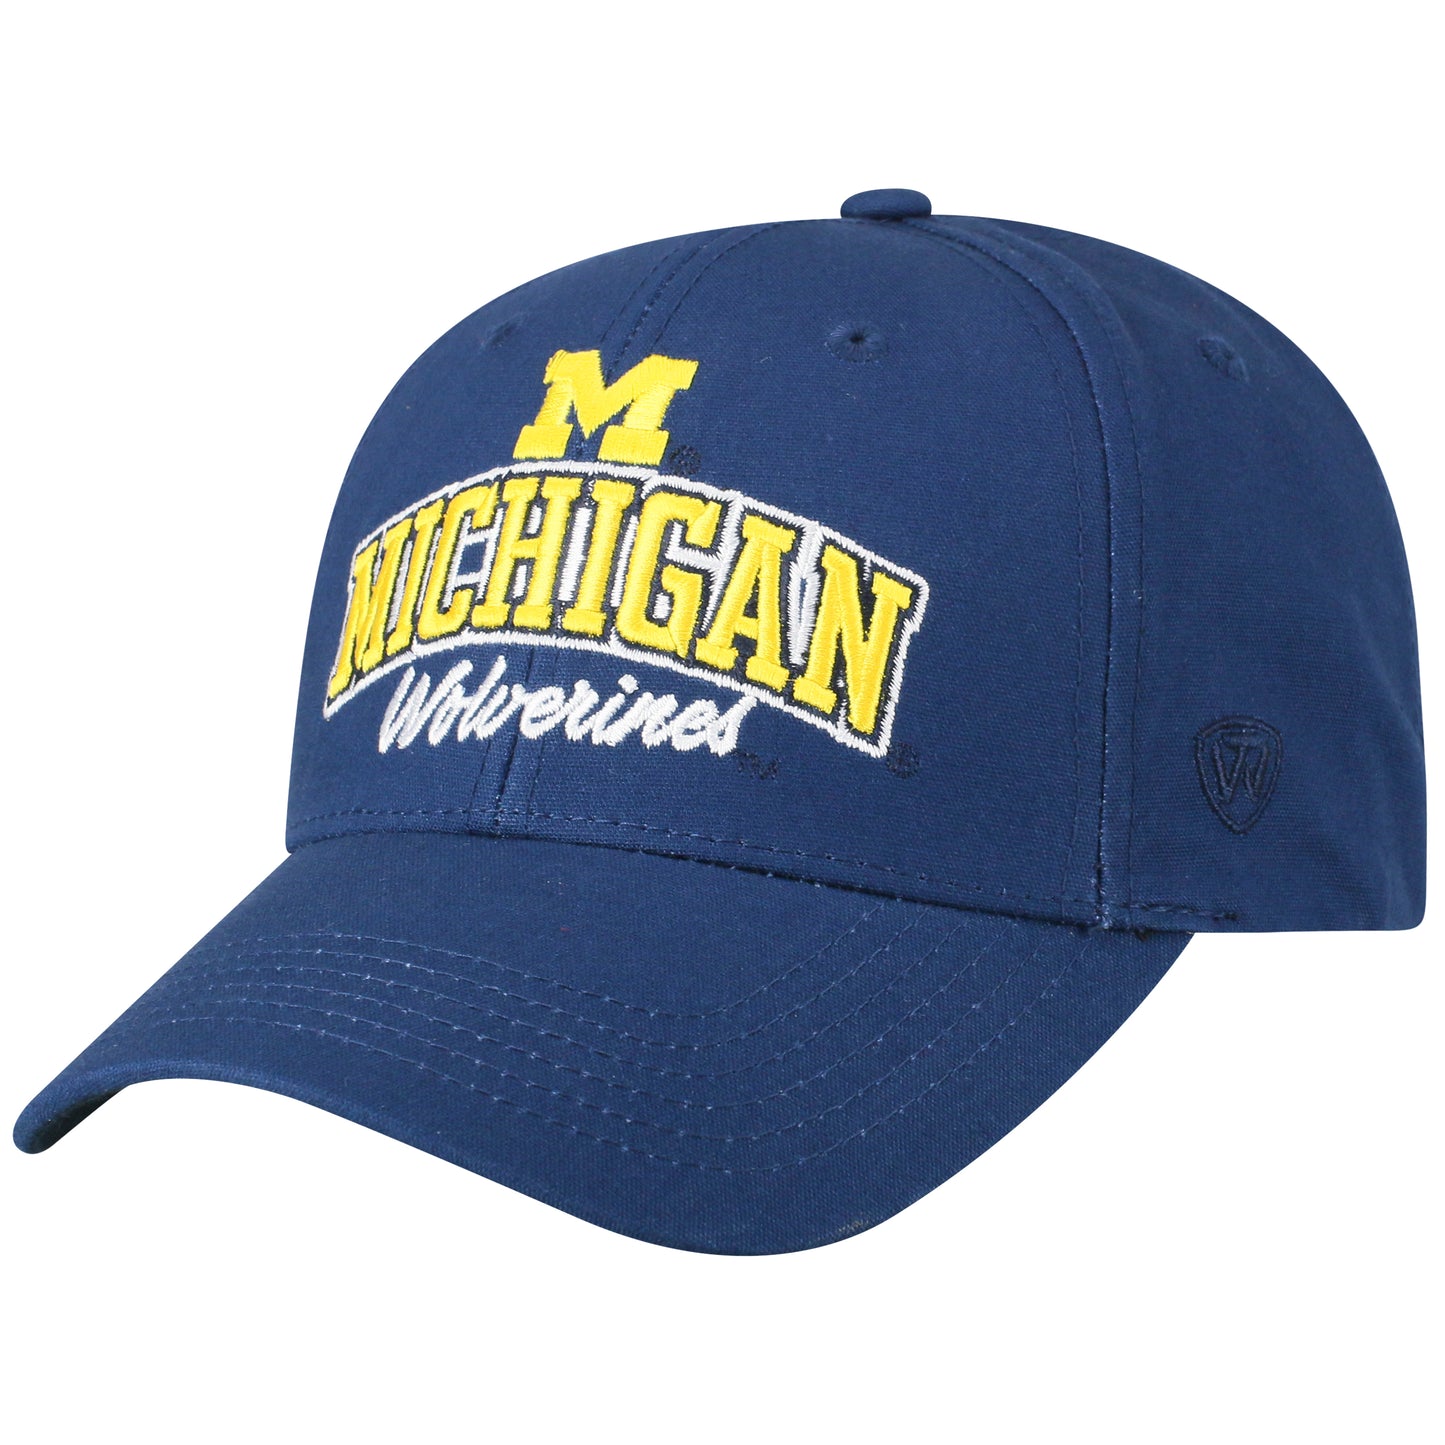 Mens Michigan Wolverines Advisor Adjustable Hat By Top Of The World